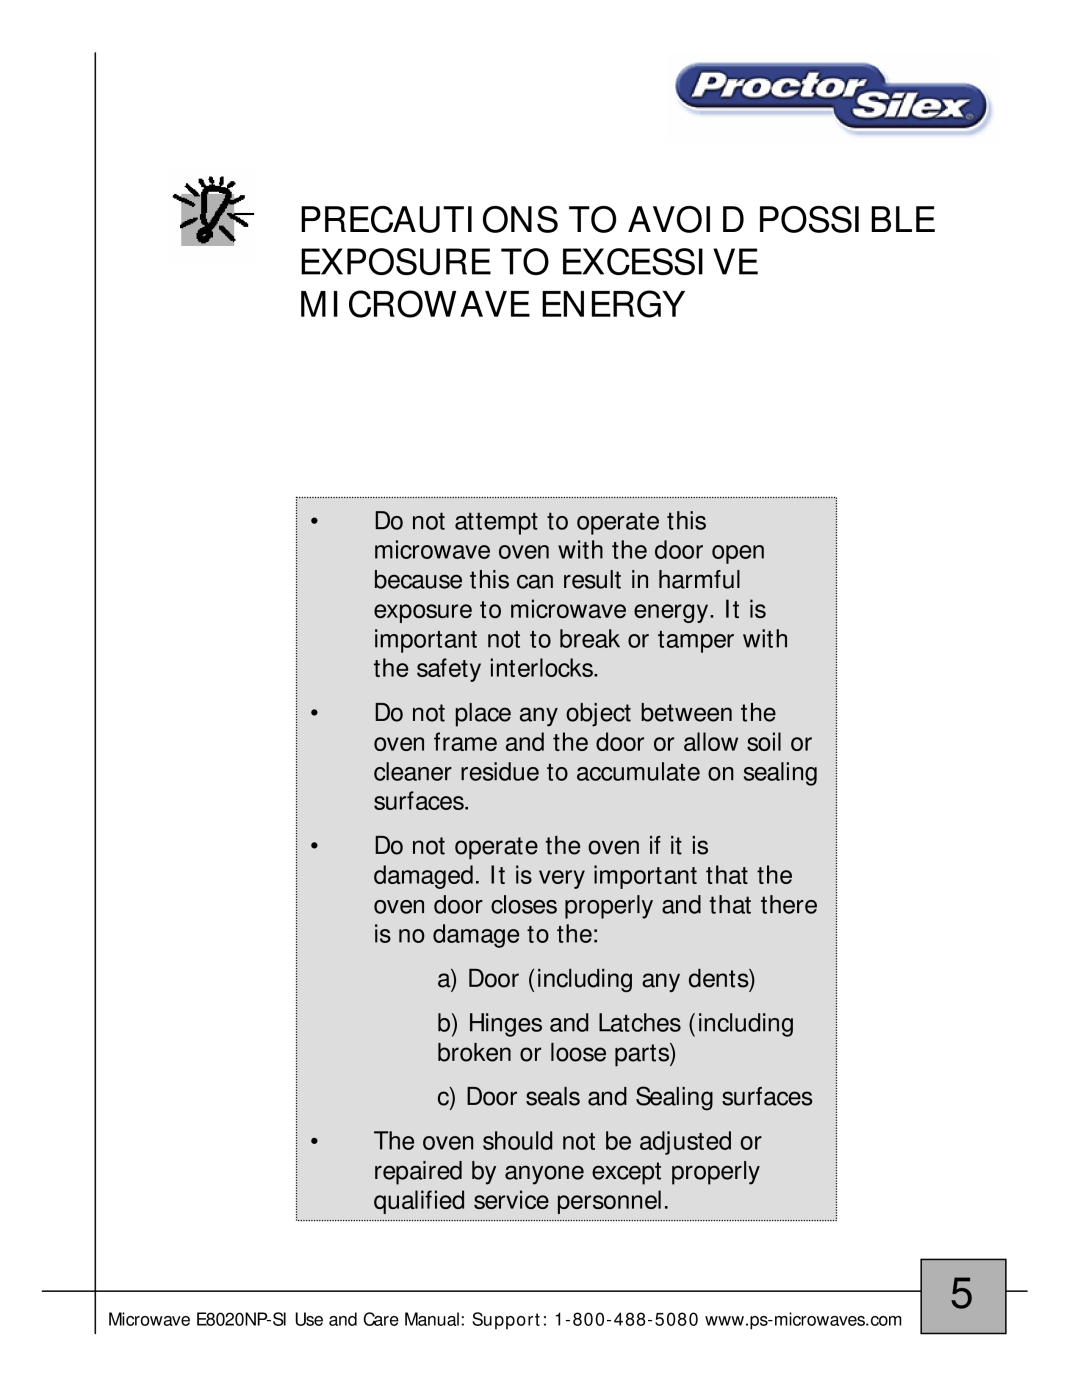 Proctor-Silex E8020NP-SI owner manual Precautions To Avoid Possible Exposure To Excessive Microwave Energy 